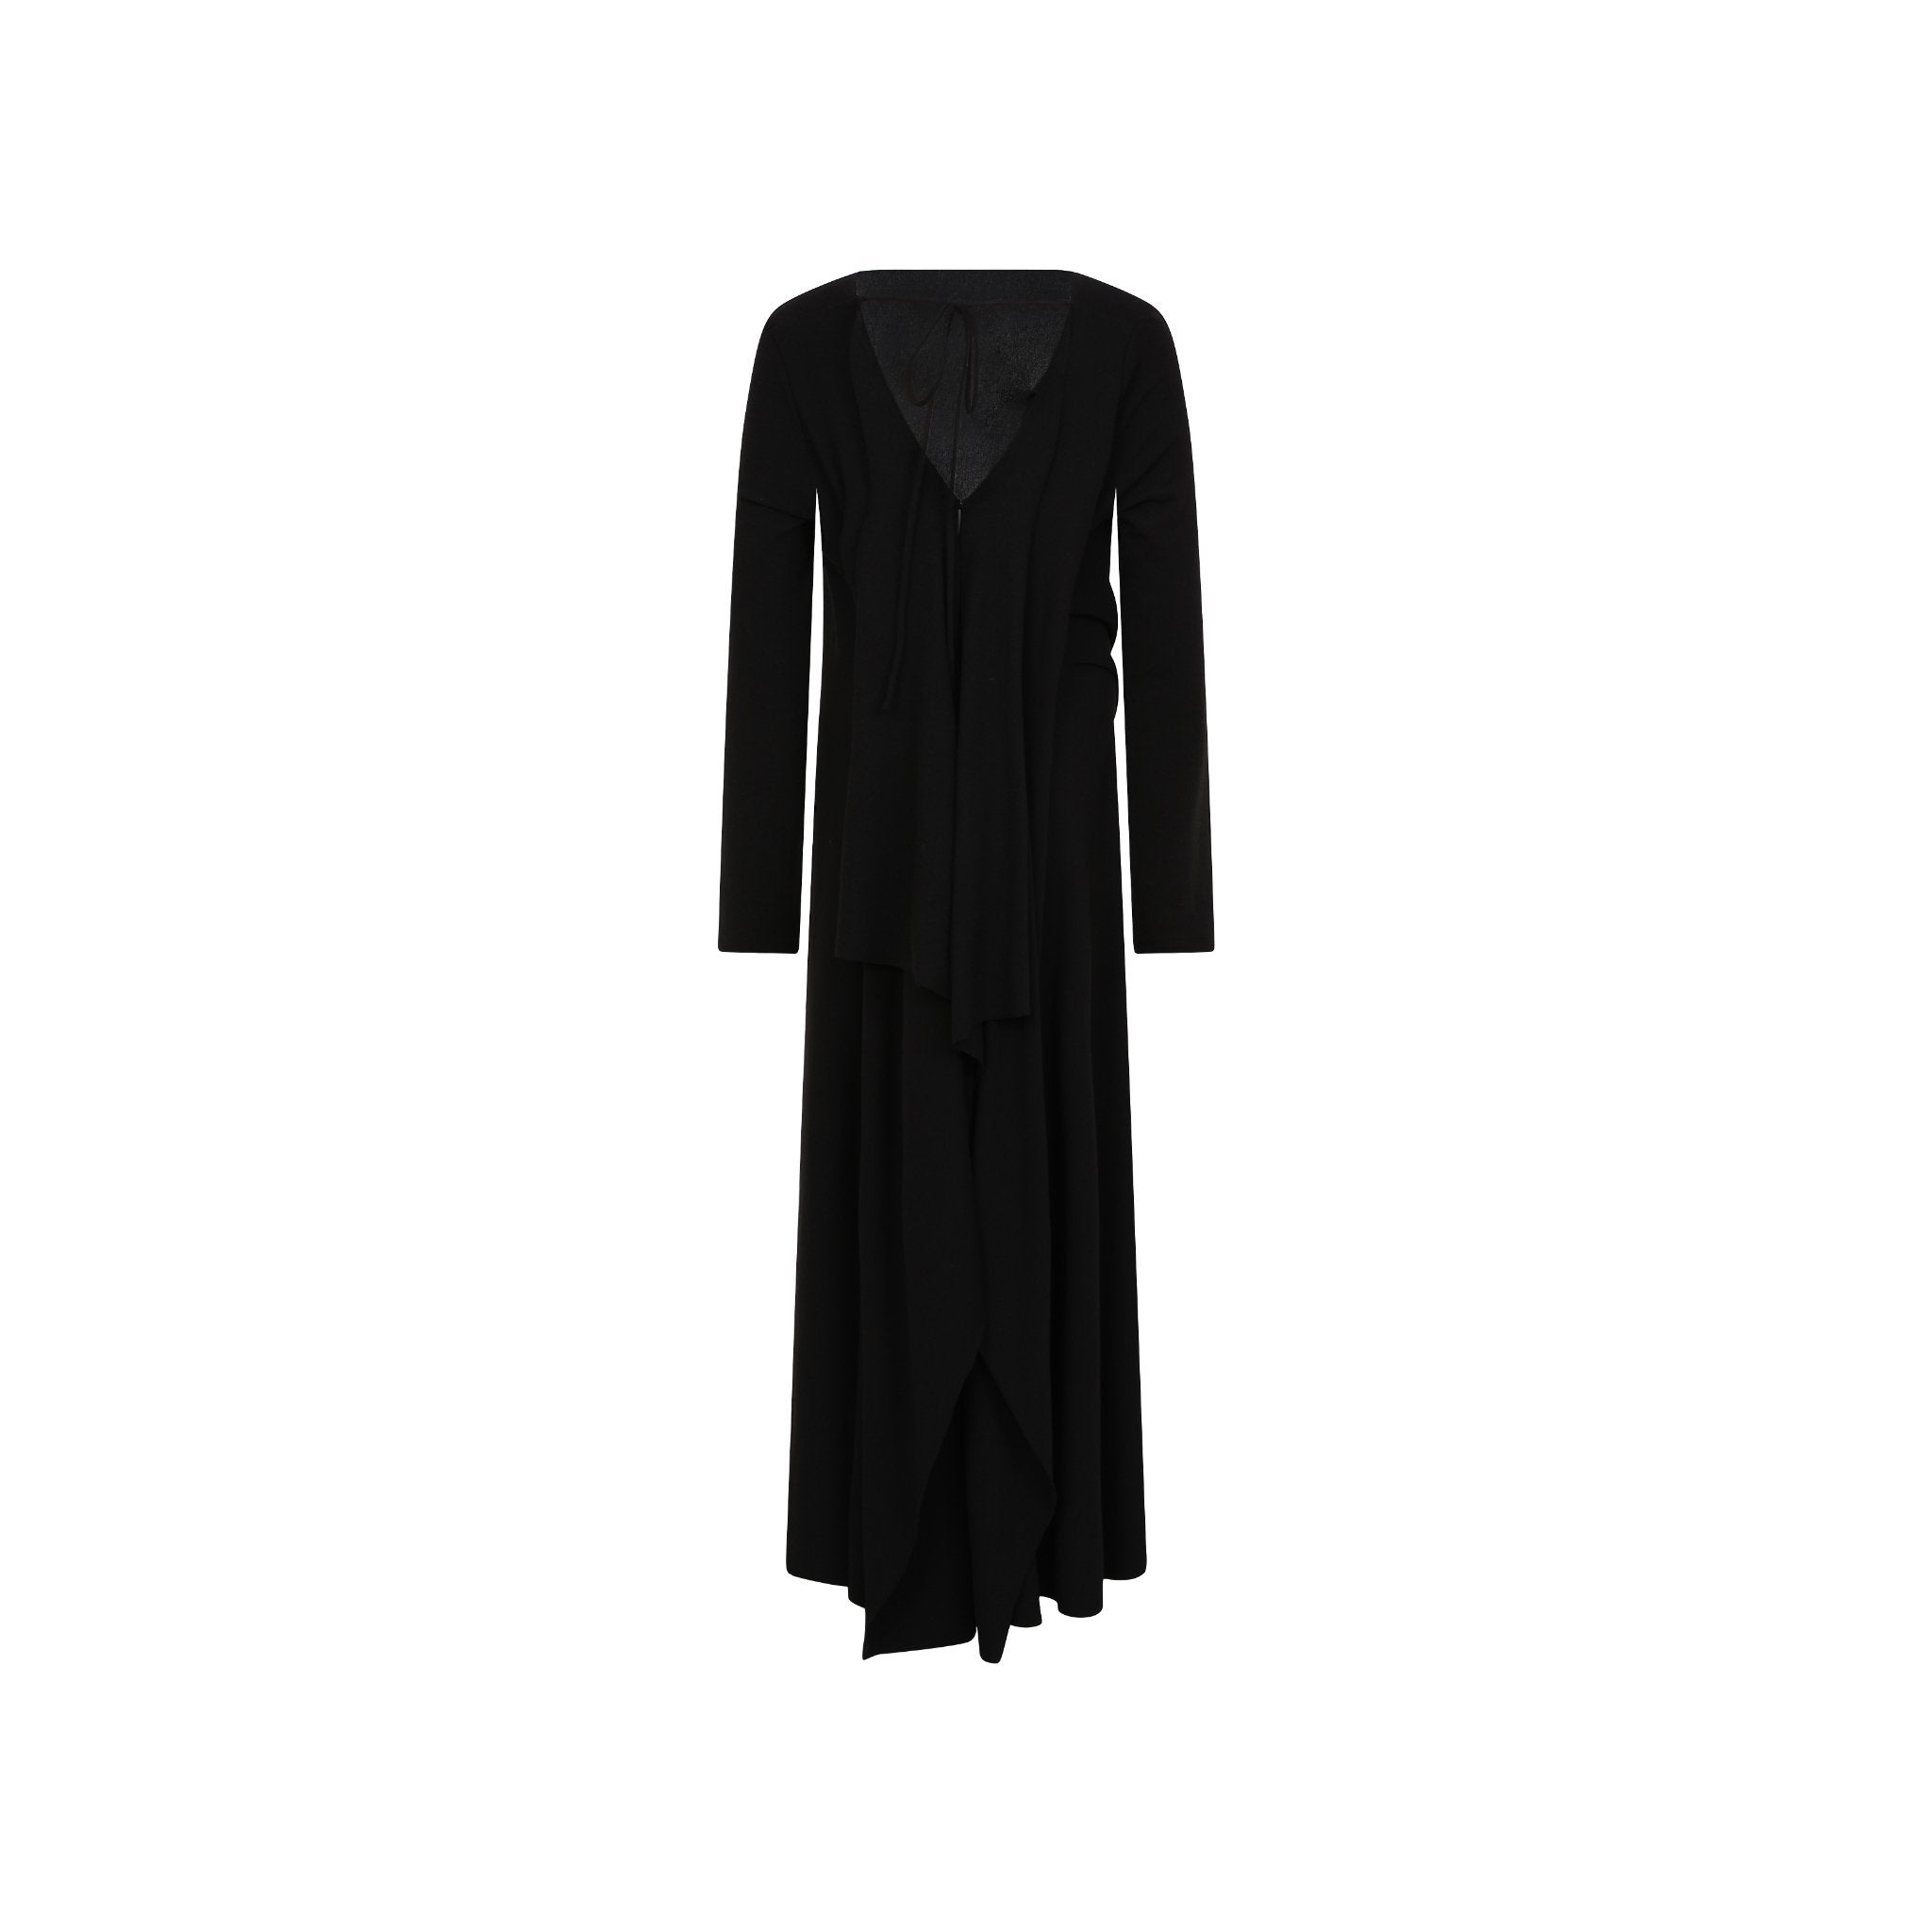 ELYWOOD Black Knit Silhouette Long Dress | MADA IN CHINA